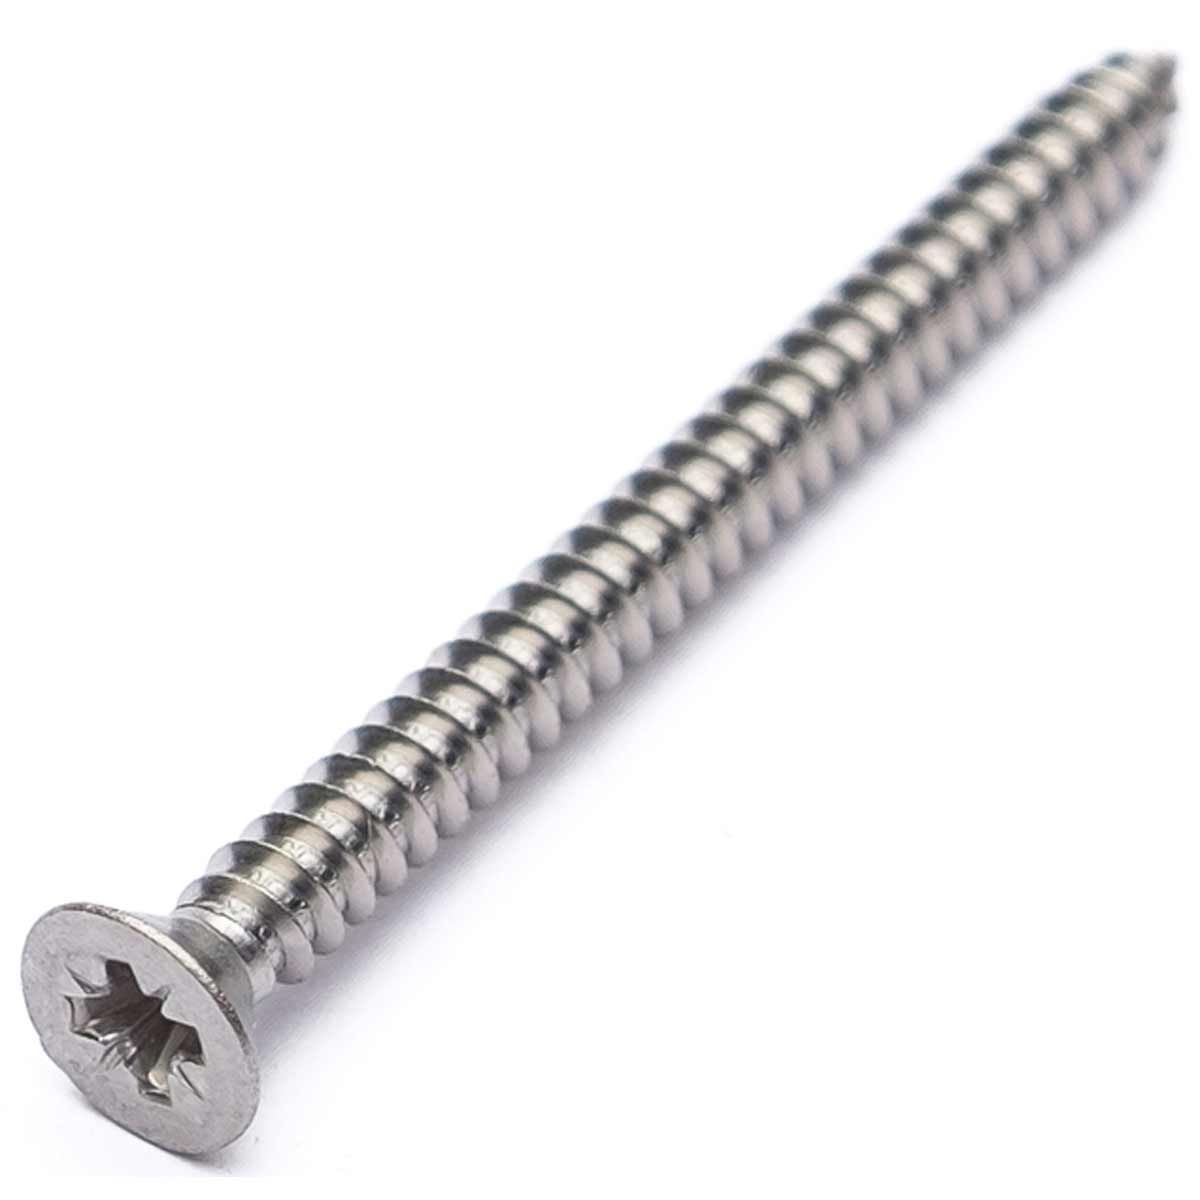 AG ECS Vent No8 x 2" Stainless Steel Countersunk Posi Self Tapping Screw